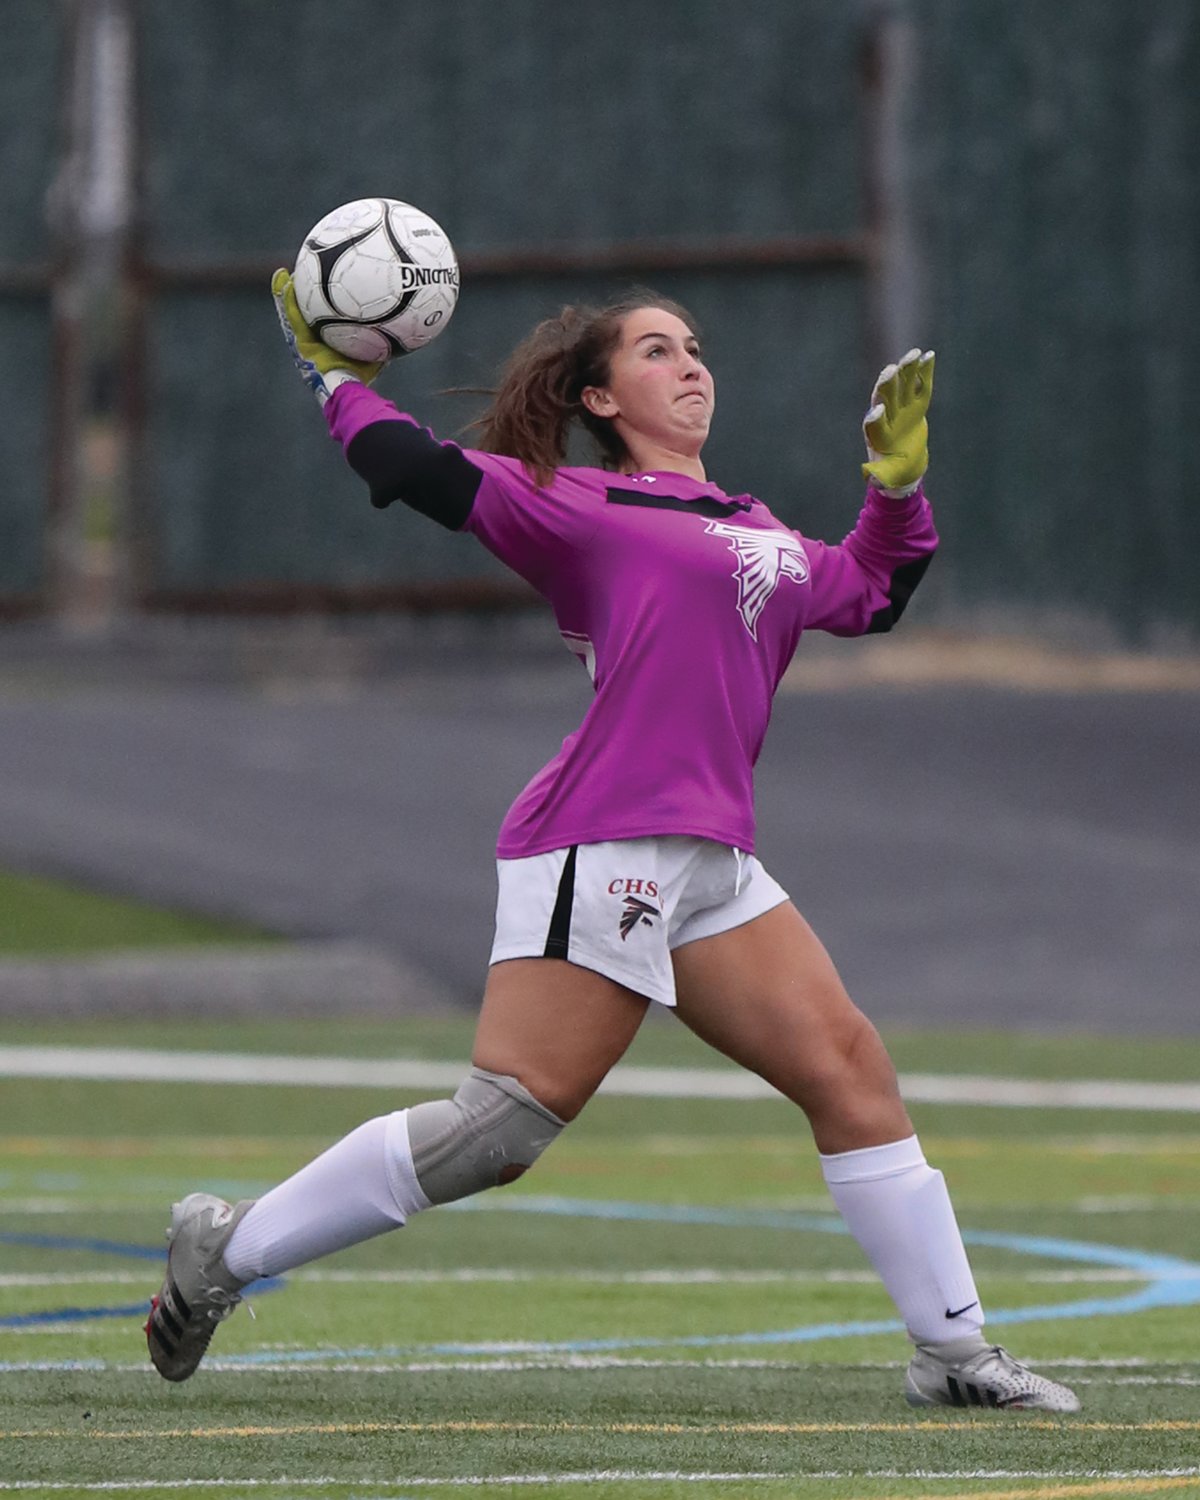 IN NET: Goalie Sam Rosenfield throws the ball out of the zone during the City Cup exhibition at Cranston Stadium.